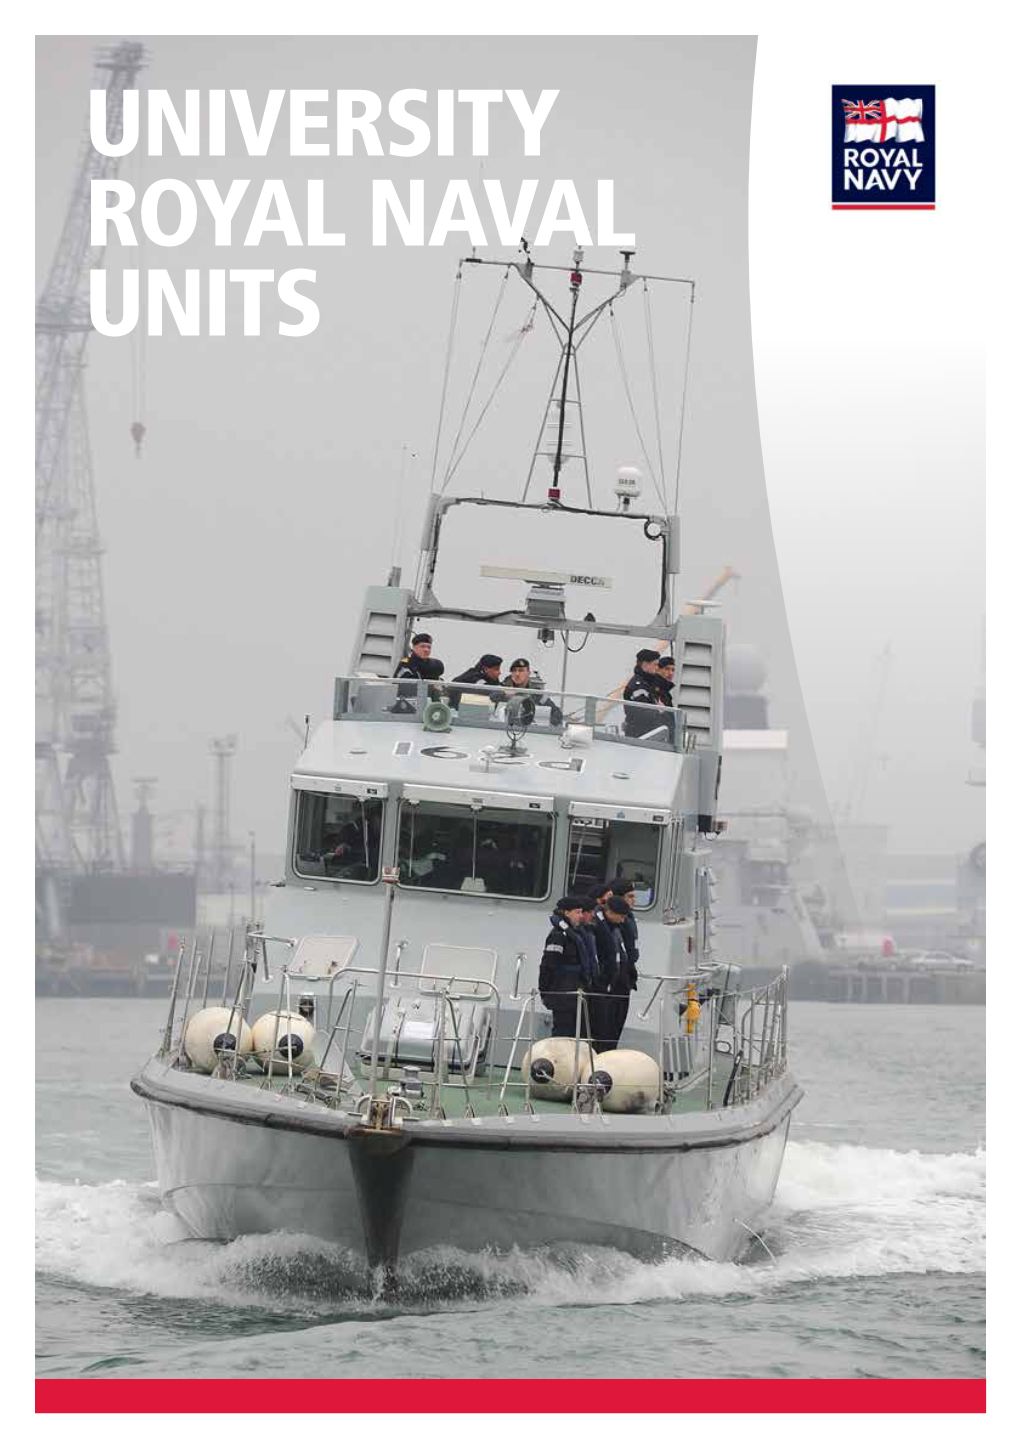 UNIVERSITY ROYAL NAVAL UNITS Each of the 15 University Royal Naval Units (URNU) Trains a Range of Undergraduates from Local Universities